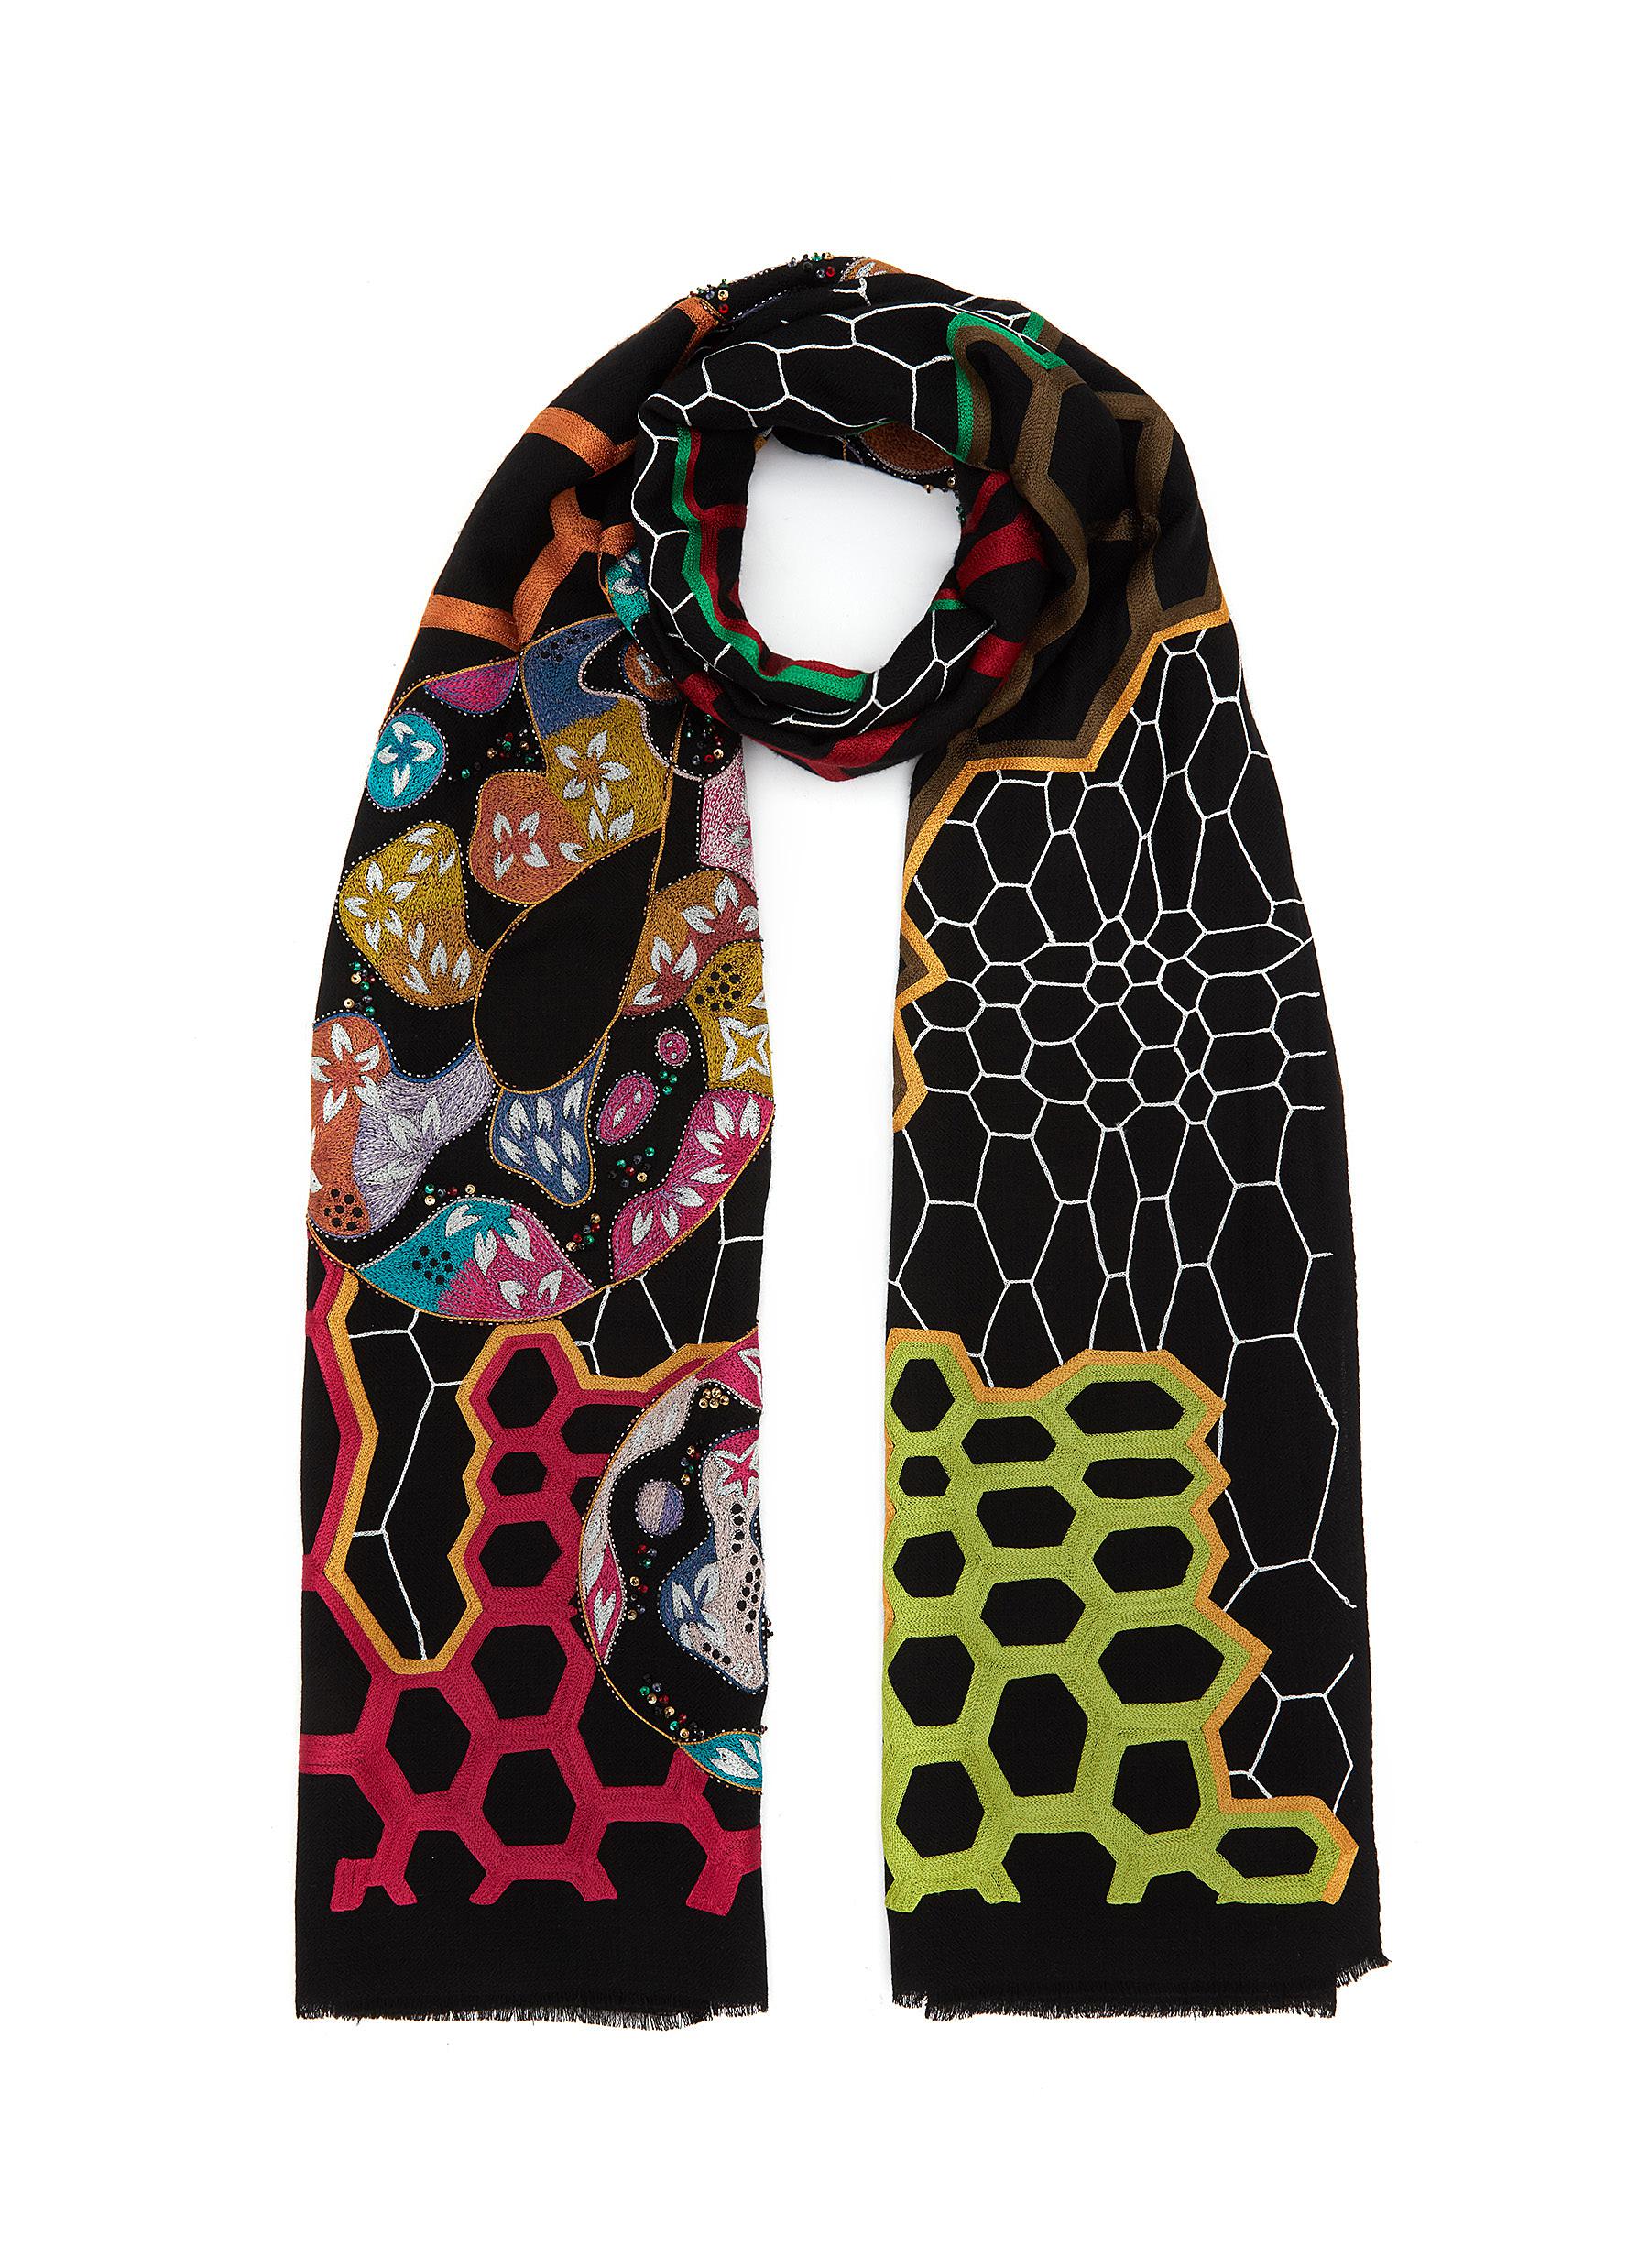 The New King Embroidered Merino Wool Scarf